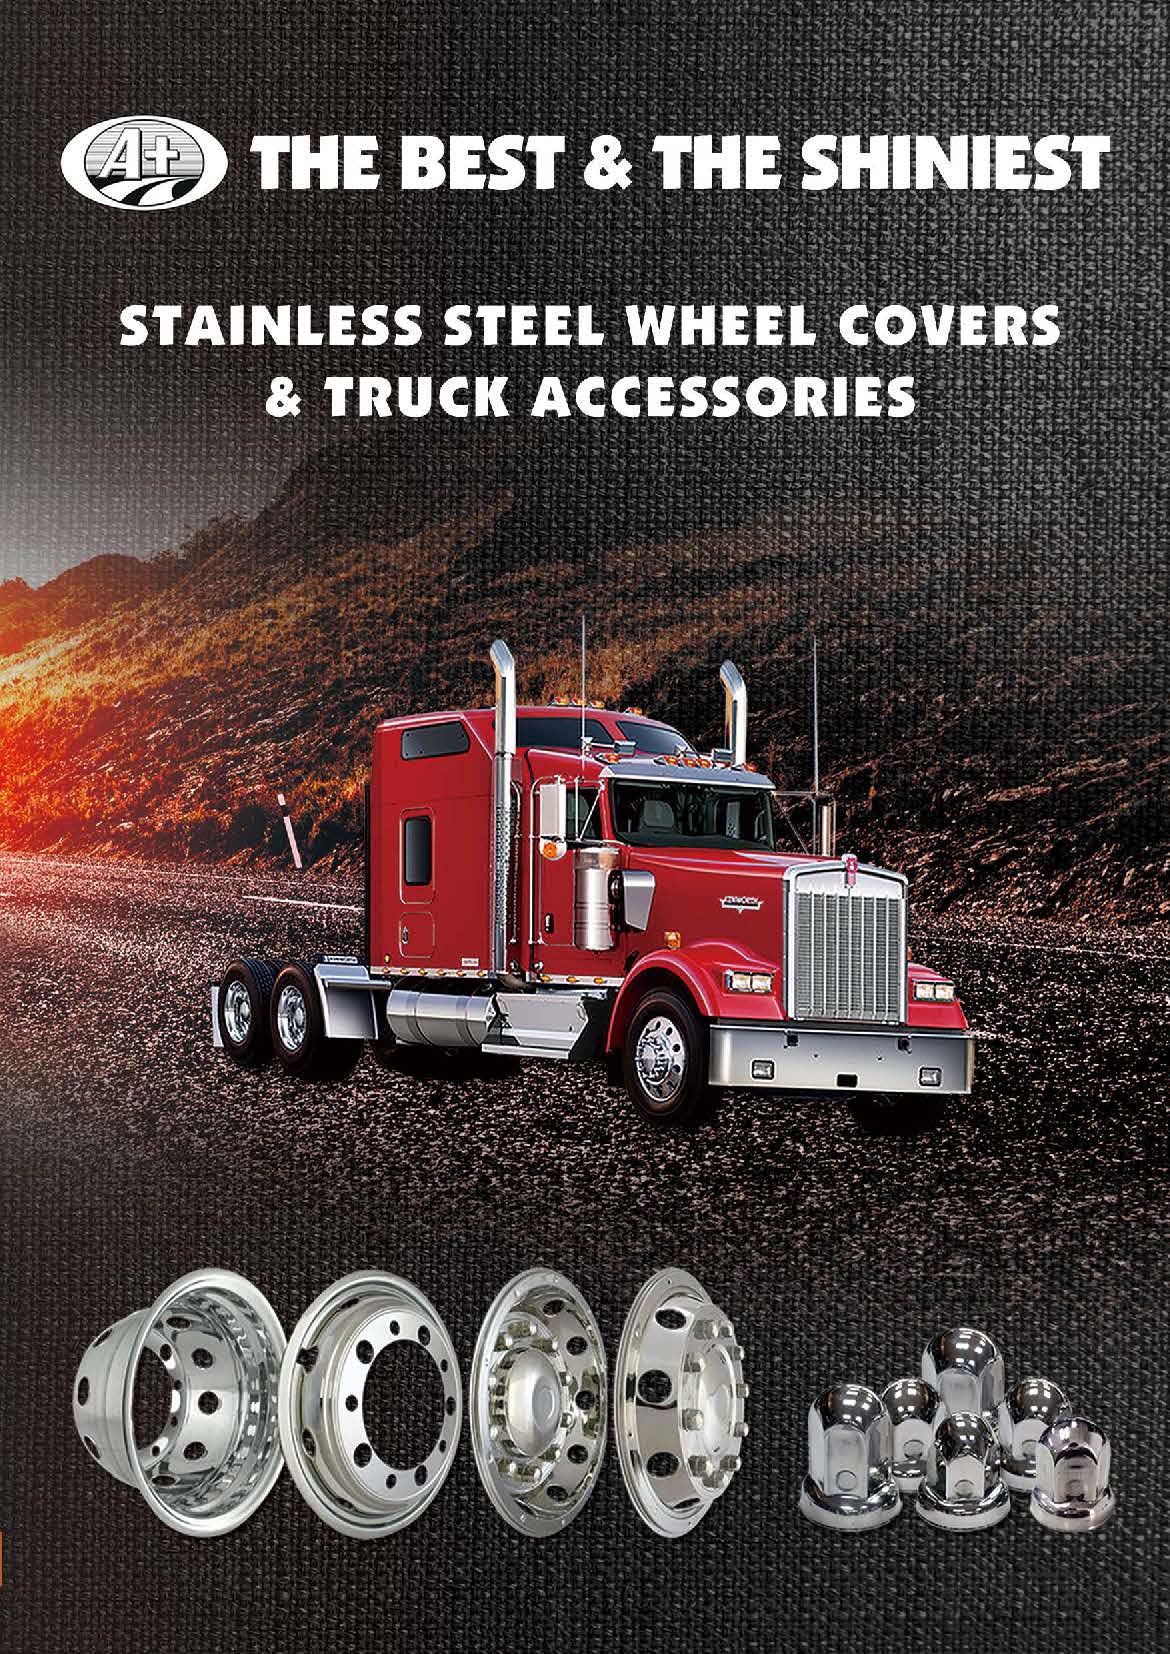 A+ Stainless Steel Wheel Covers & Truck Accessories